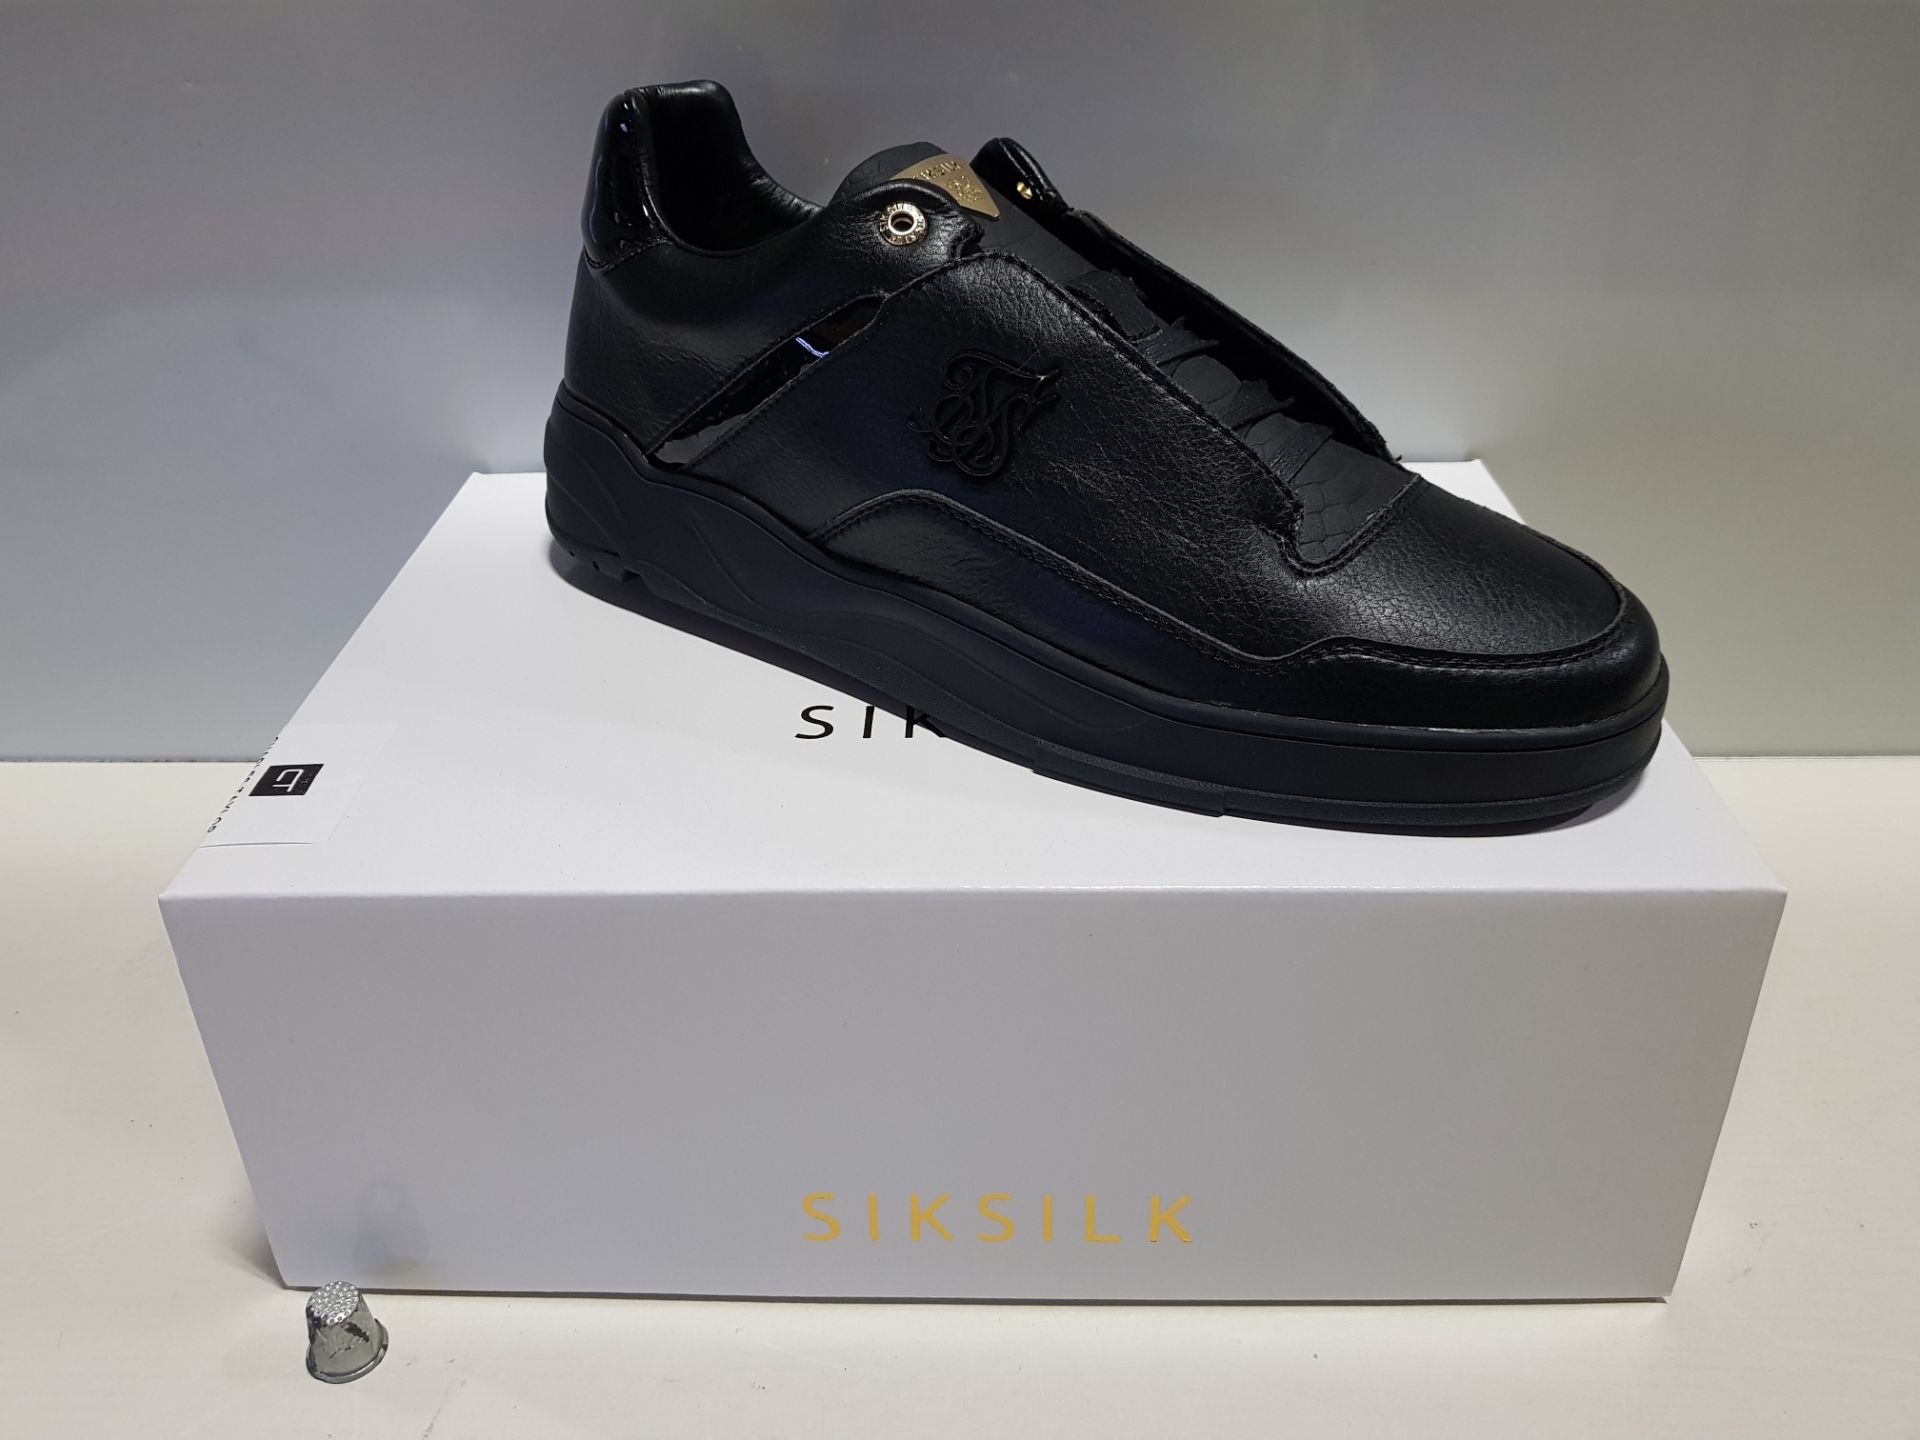 4 X BRAND NEW SIK SILK BLAZE LUX IN BLACK AND GOLD - IN SIZE UK 9 - ( SS-16120 )